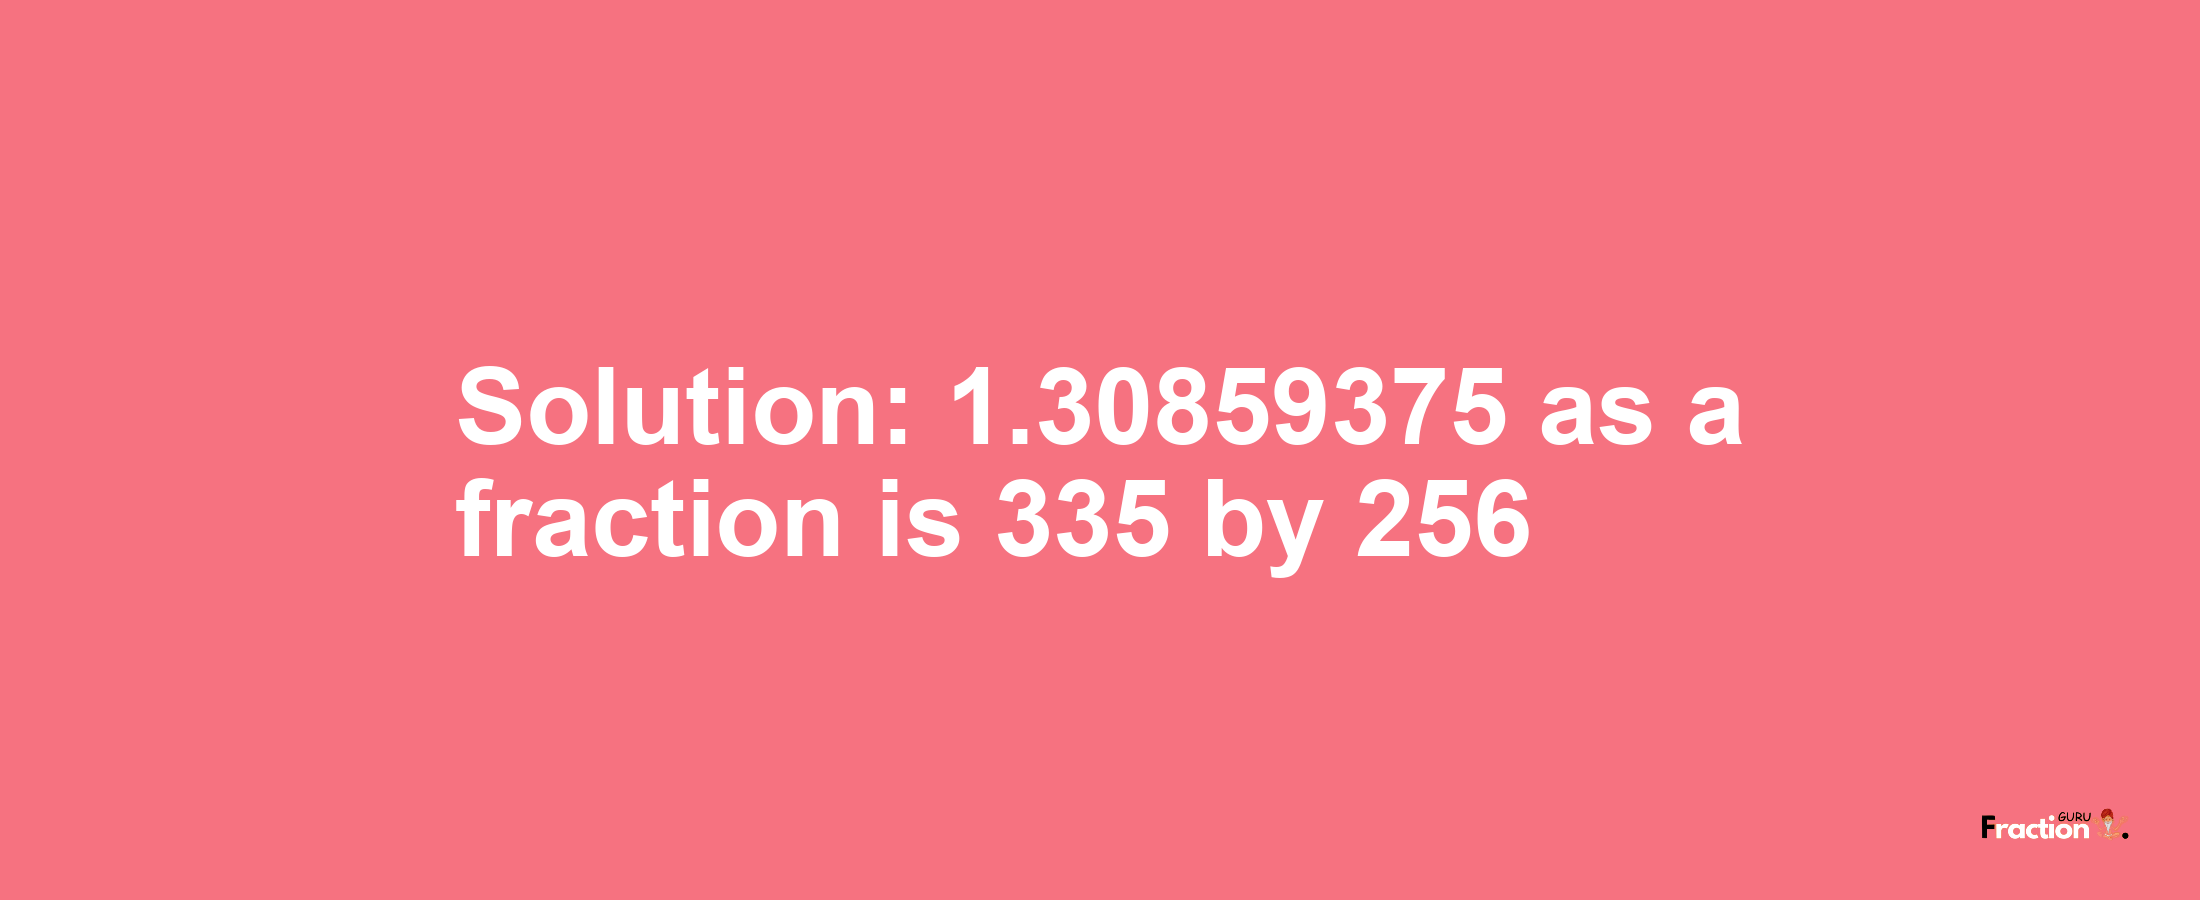 Solution:1.30859375 as a fraction is 335/256